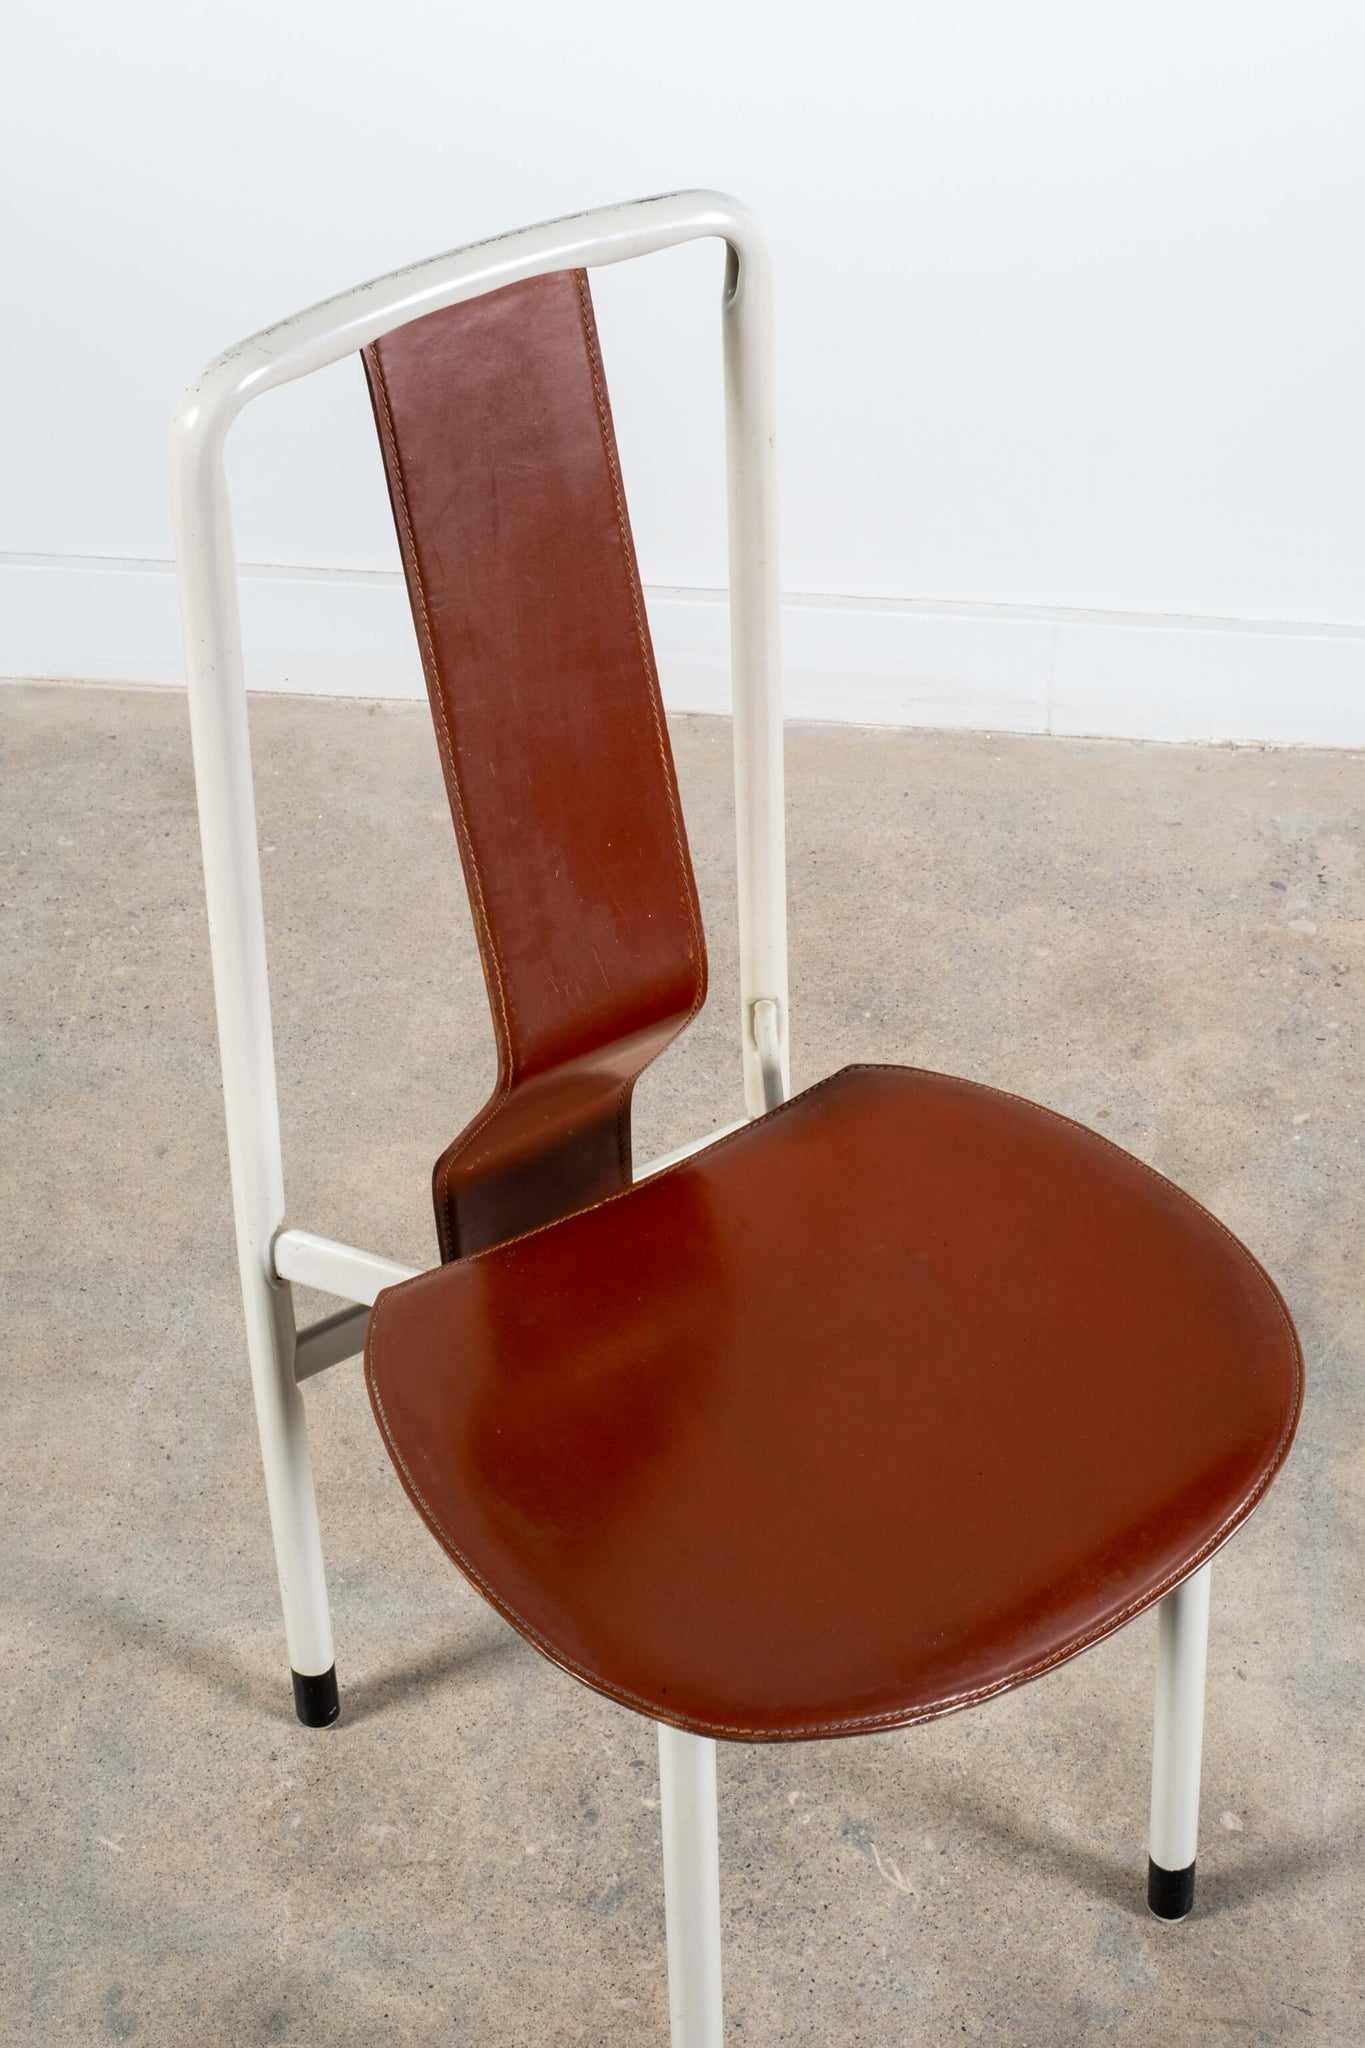 Vintage Irma White Metal Frame Side Chair with Brown Leather Seat, top view